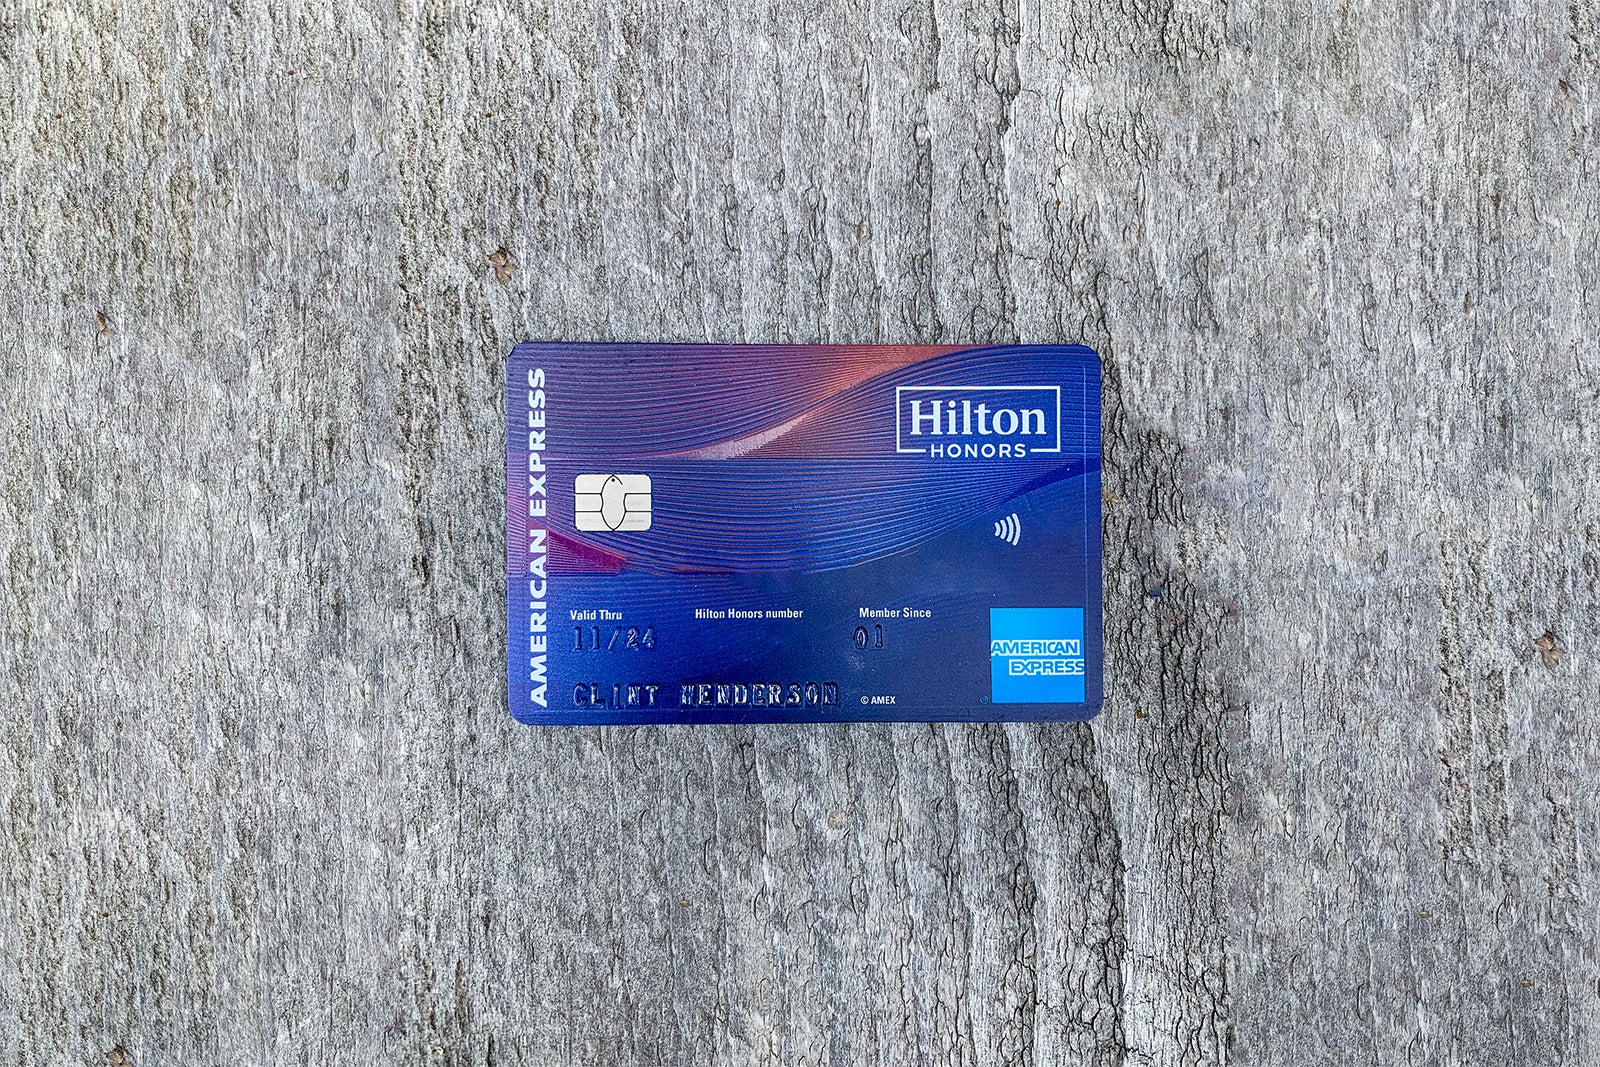 The Best Travel Credit Cards Of July 2021